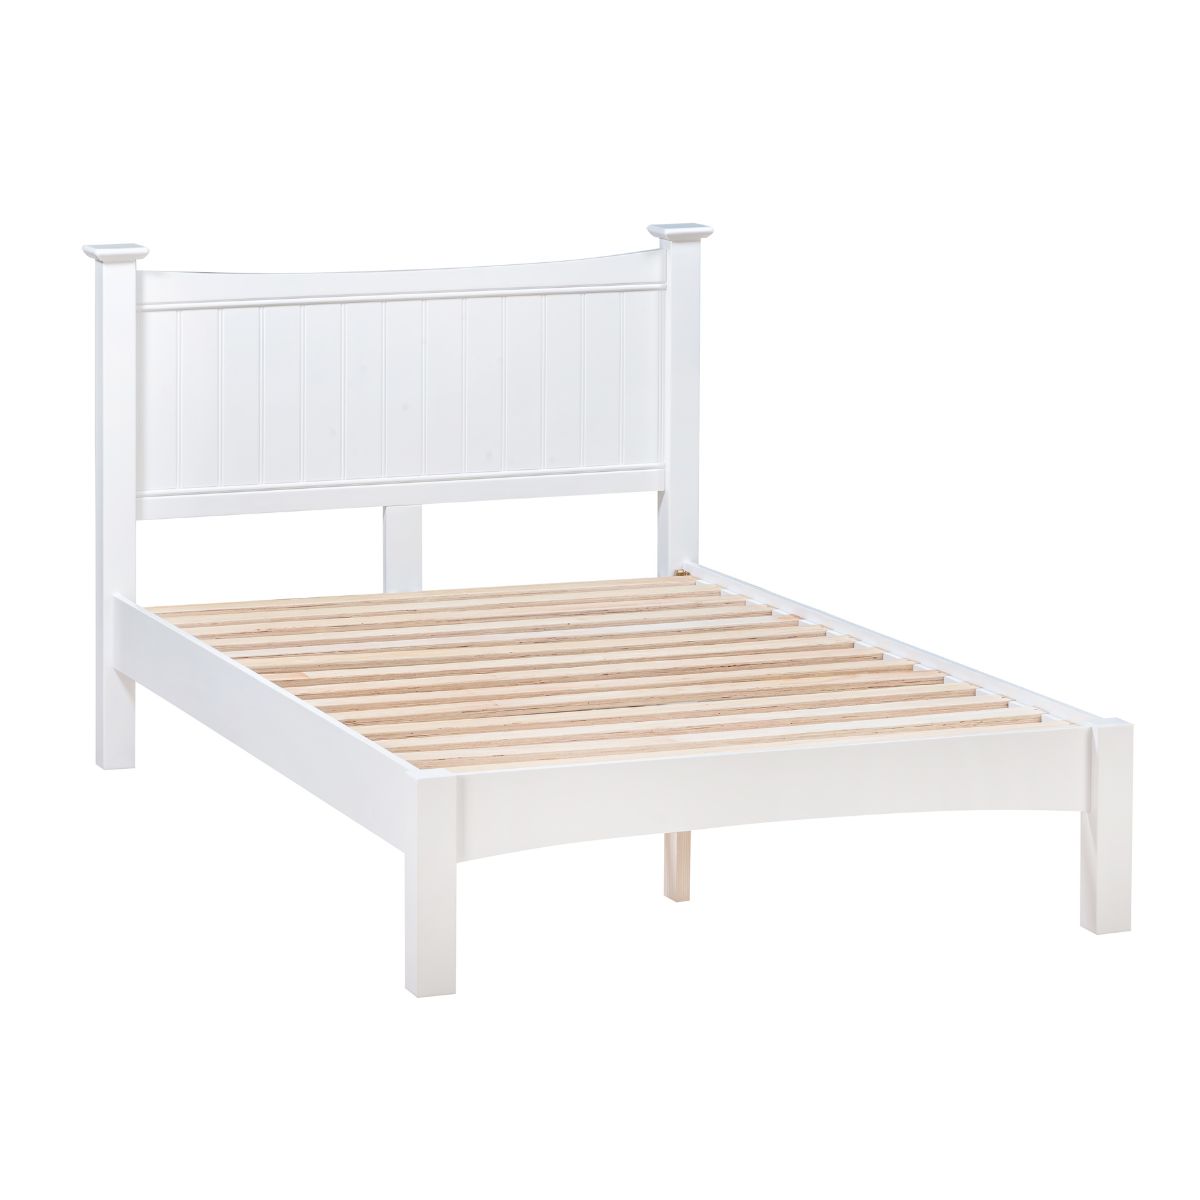 Lucilla White 4ft6 Bed - 1